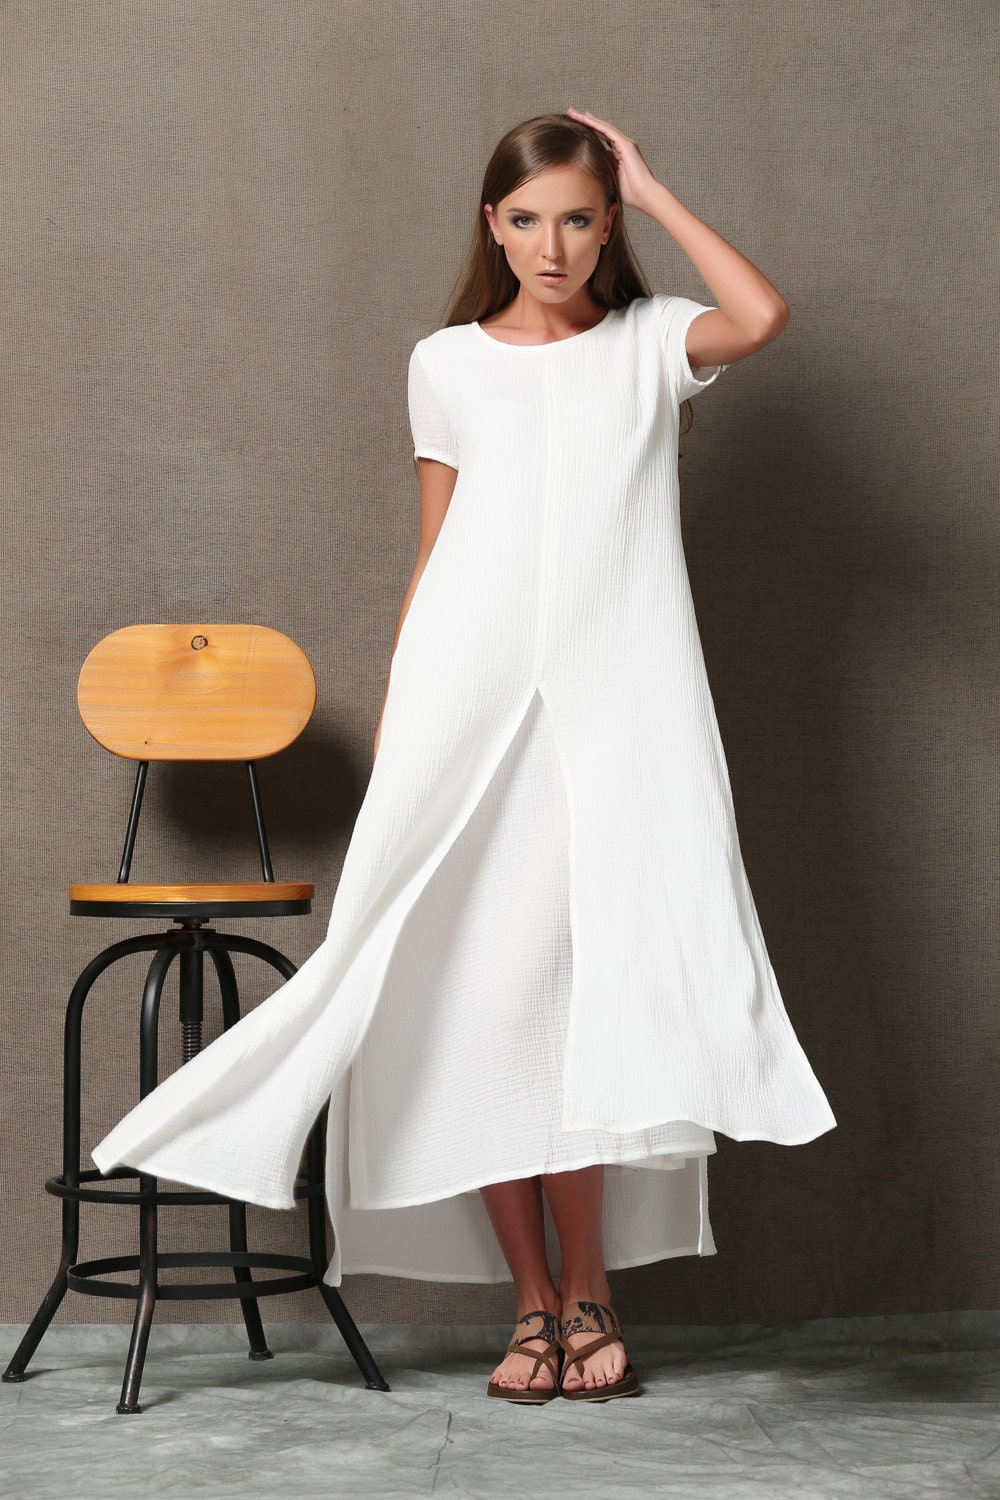 Short Sleeve White Maxi Linen Dress for Women, Summer Cotton Linen Solid  Casual Side Slit Ankle Dress With Pockets Plus Size C534 